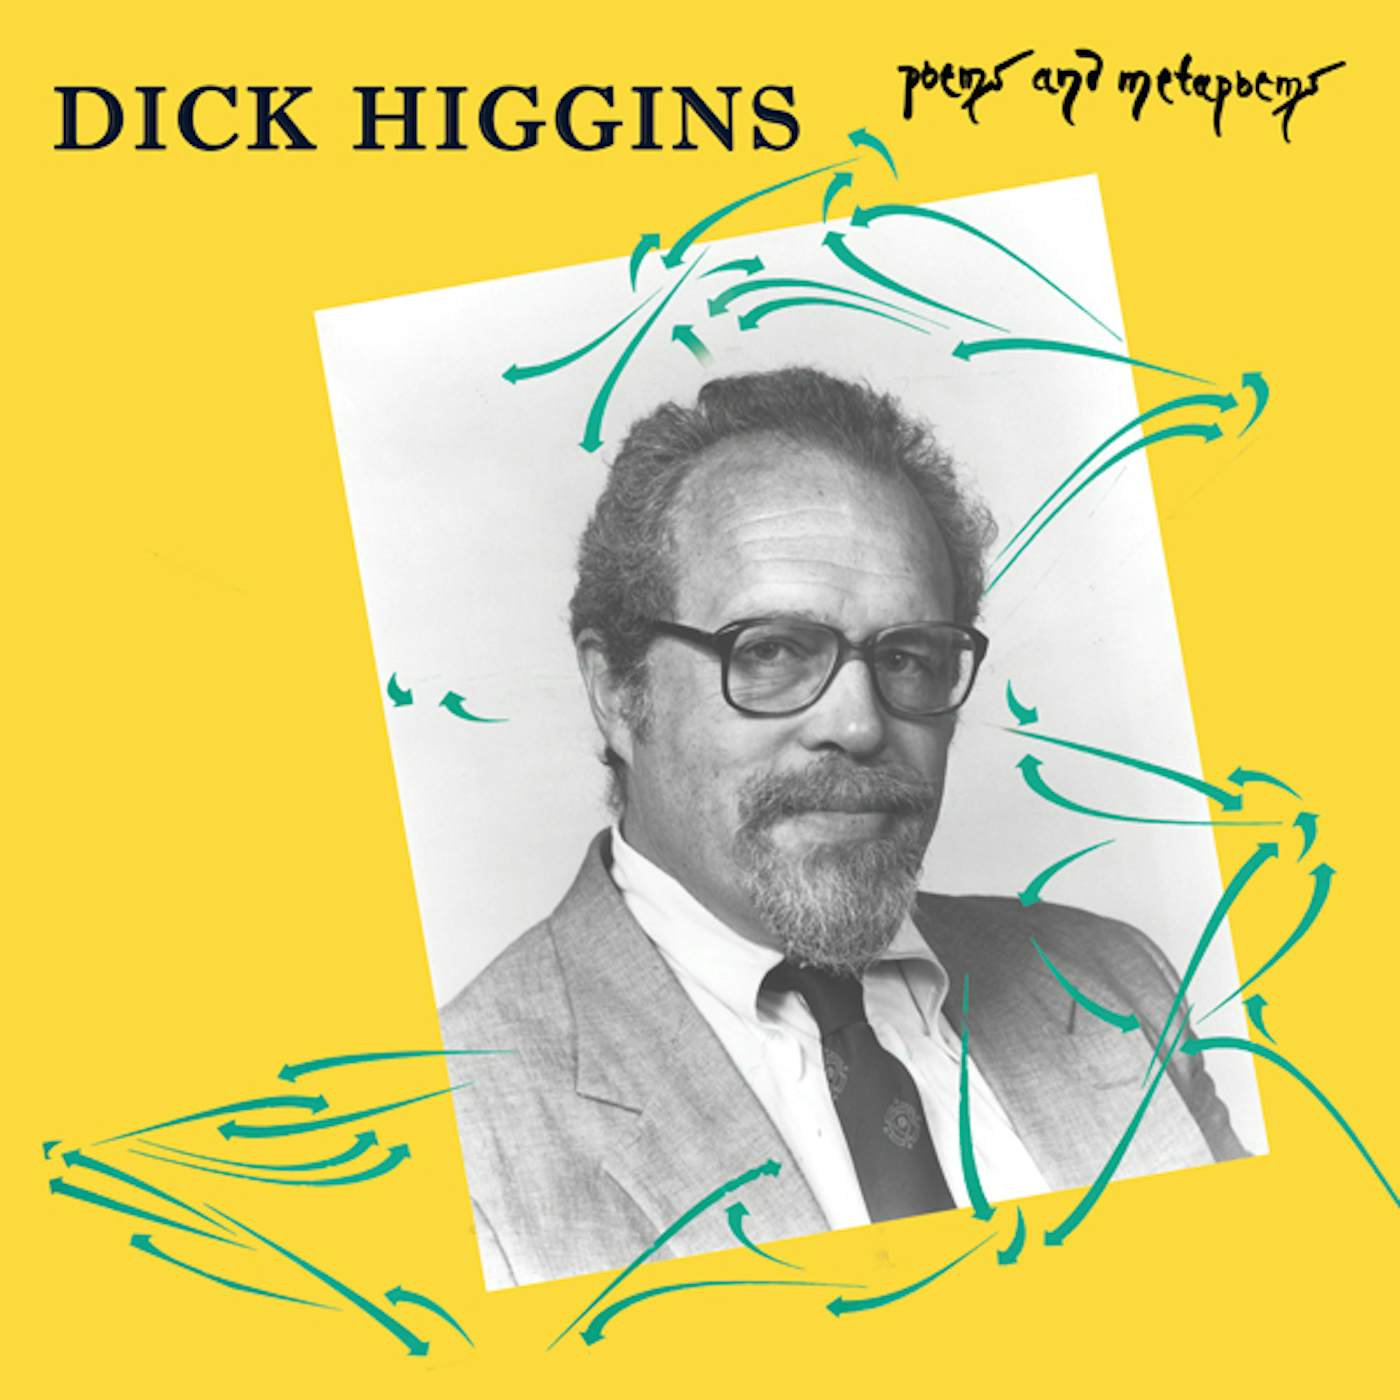 Dick Higgins Poems And Metapoems Vinyl Record